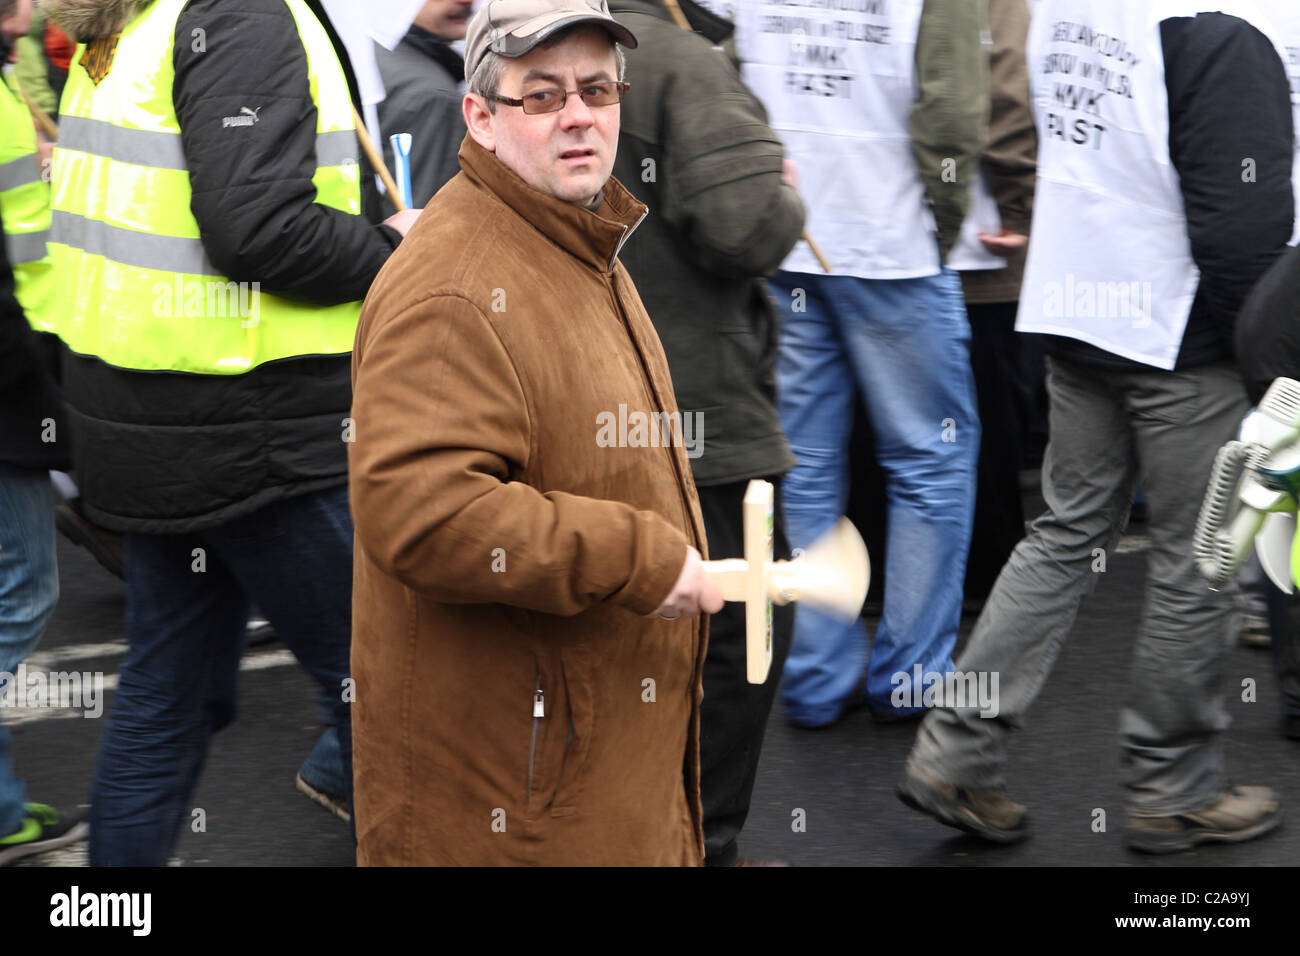 Man with clapper during coal miners protest against privatization in polish coal industry. Katowice, Poland. Stock Photo